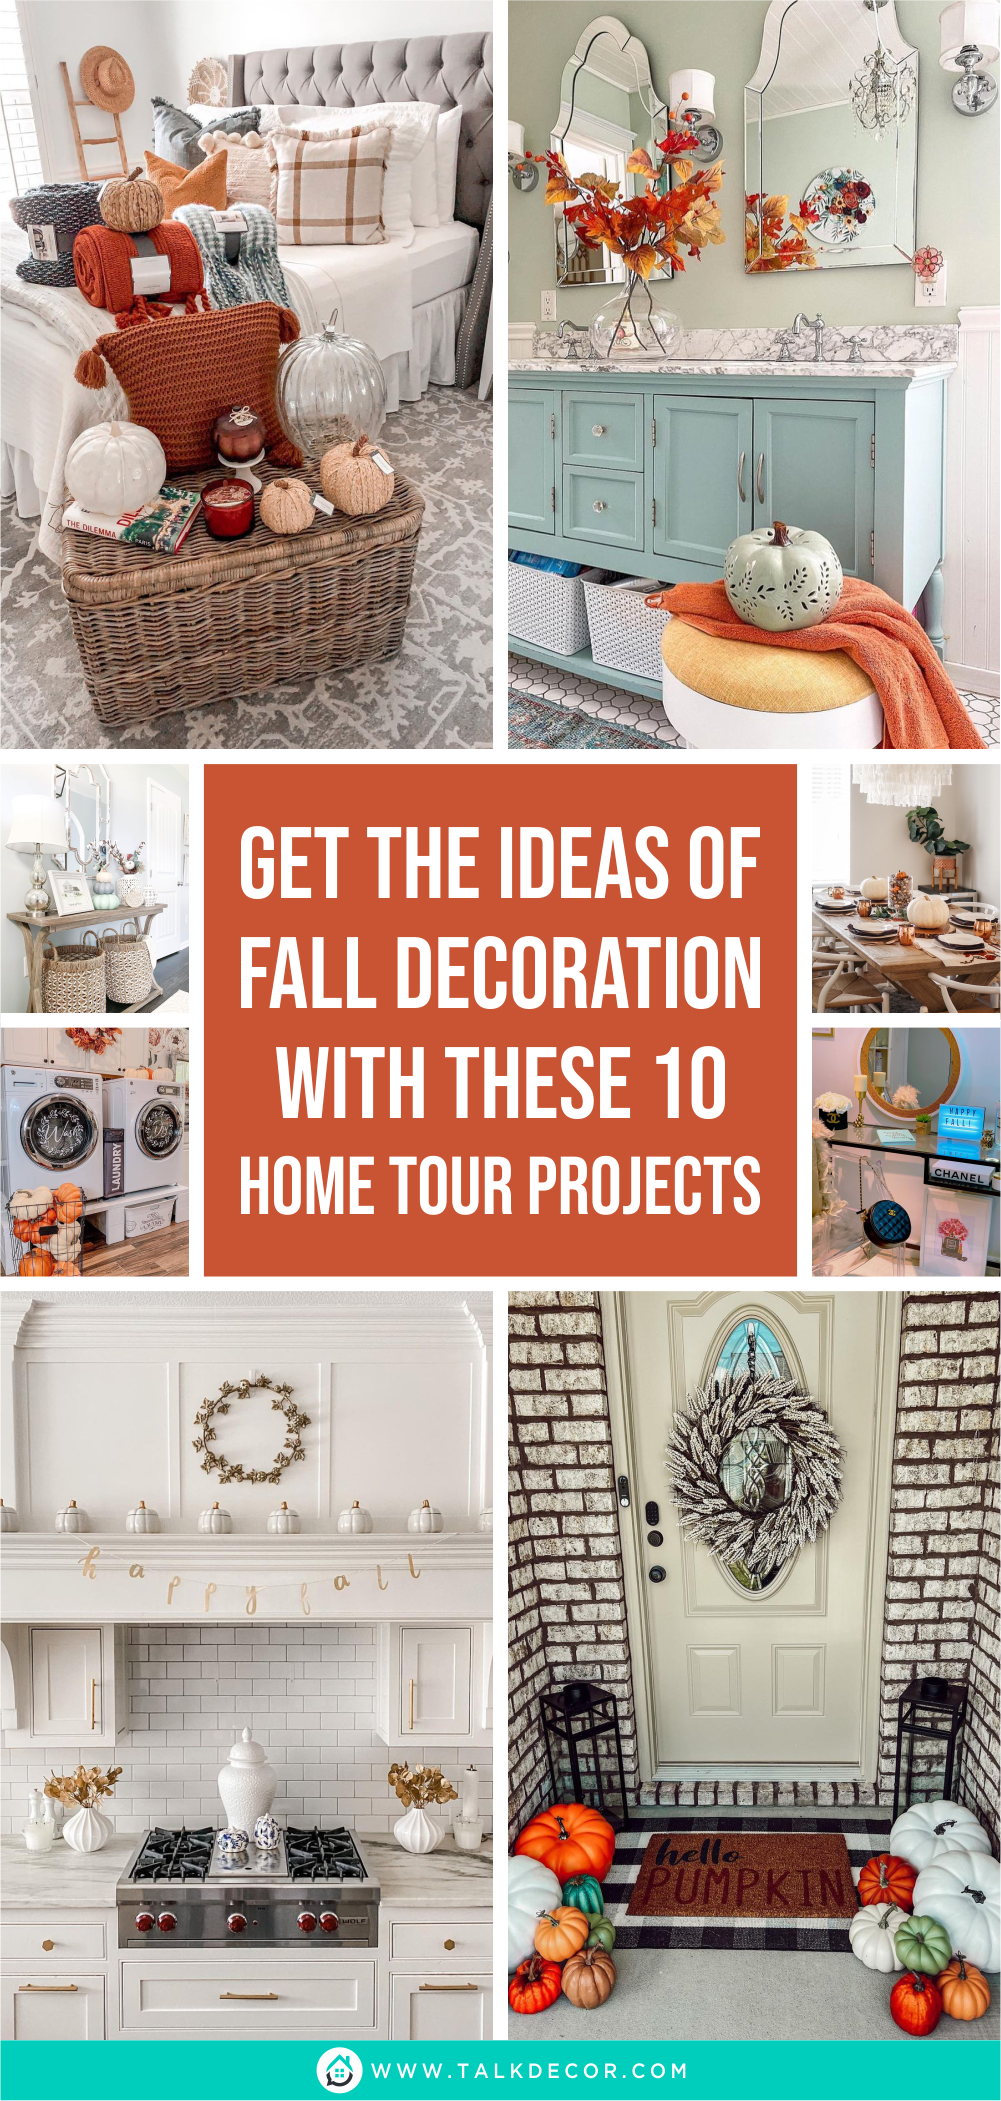 Get the Ideas of Fall Decoration with these 10 Home Tour Projects ...